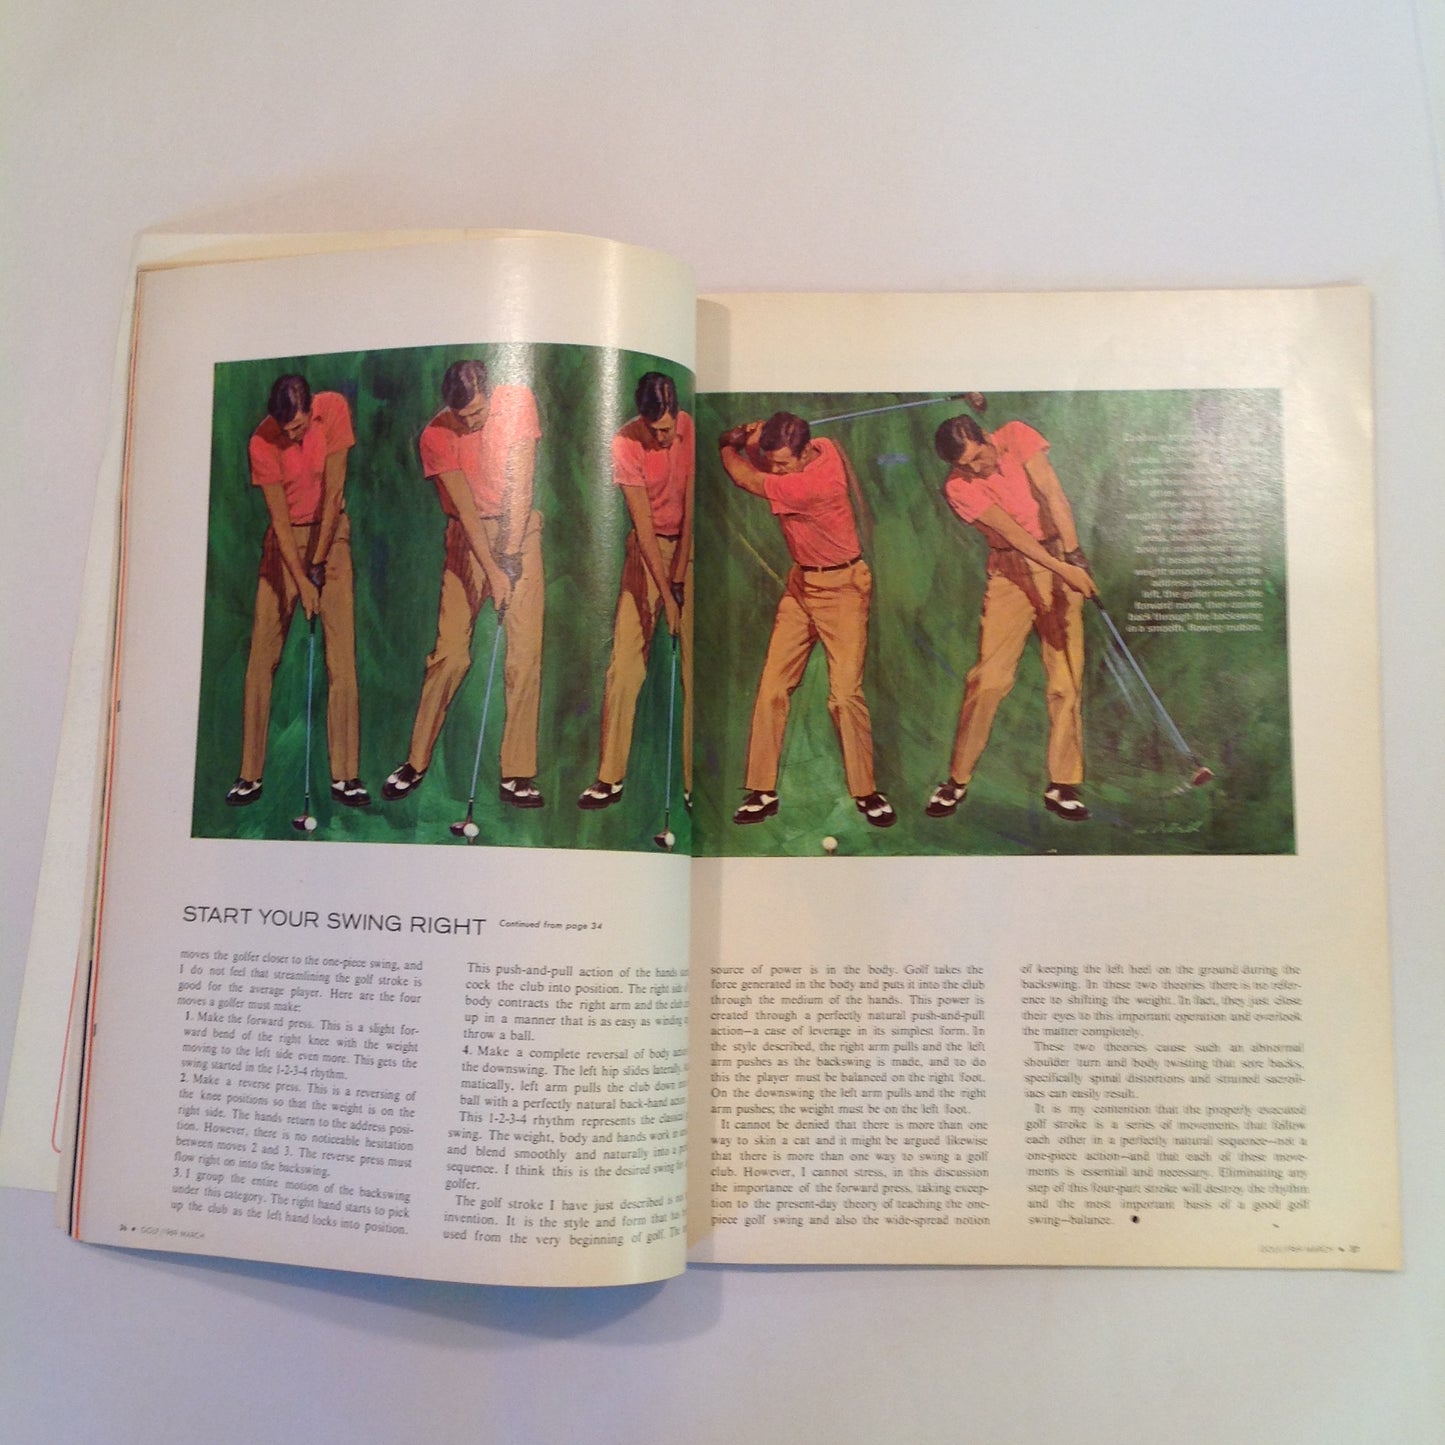 Vintage March 1969 GOLF Magazine Match Play Equipment Forward Press Battle of the Sexes